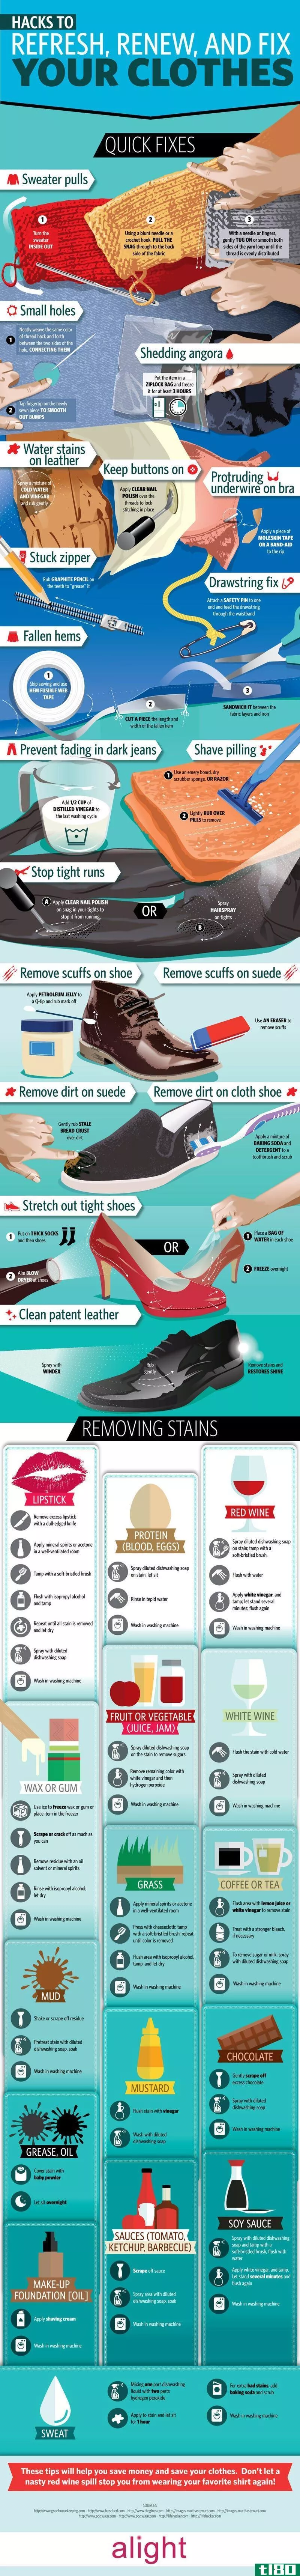 Illustration for article titled This Graphic Shows You How to Repair Common Clothing Problems